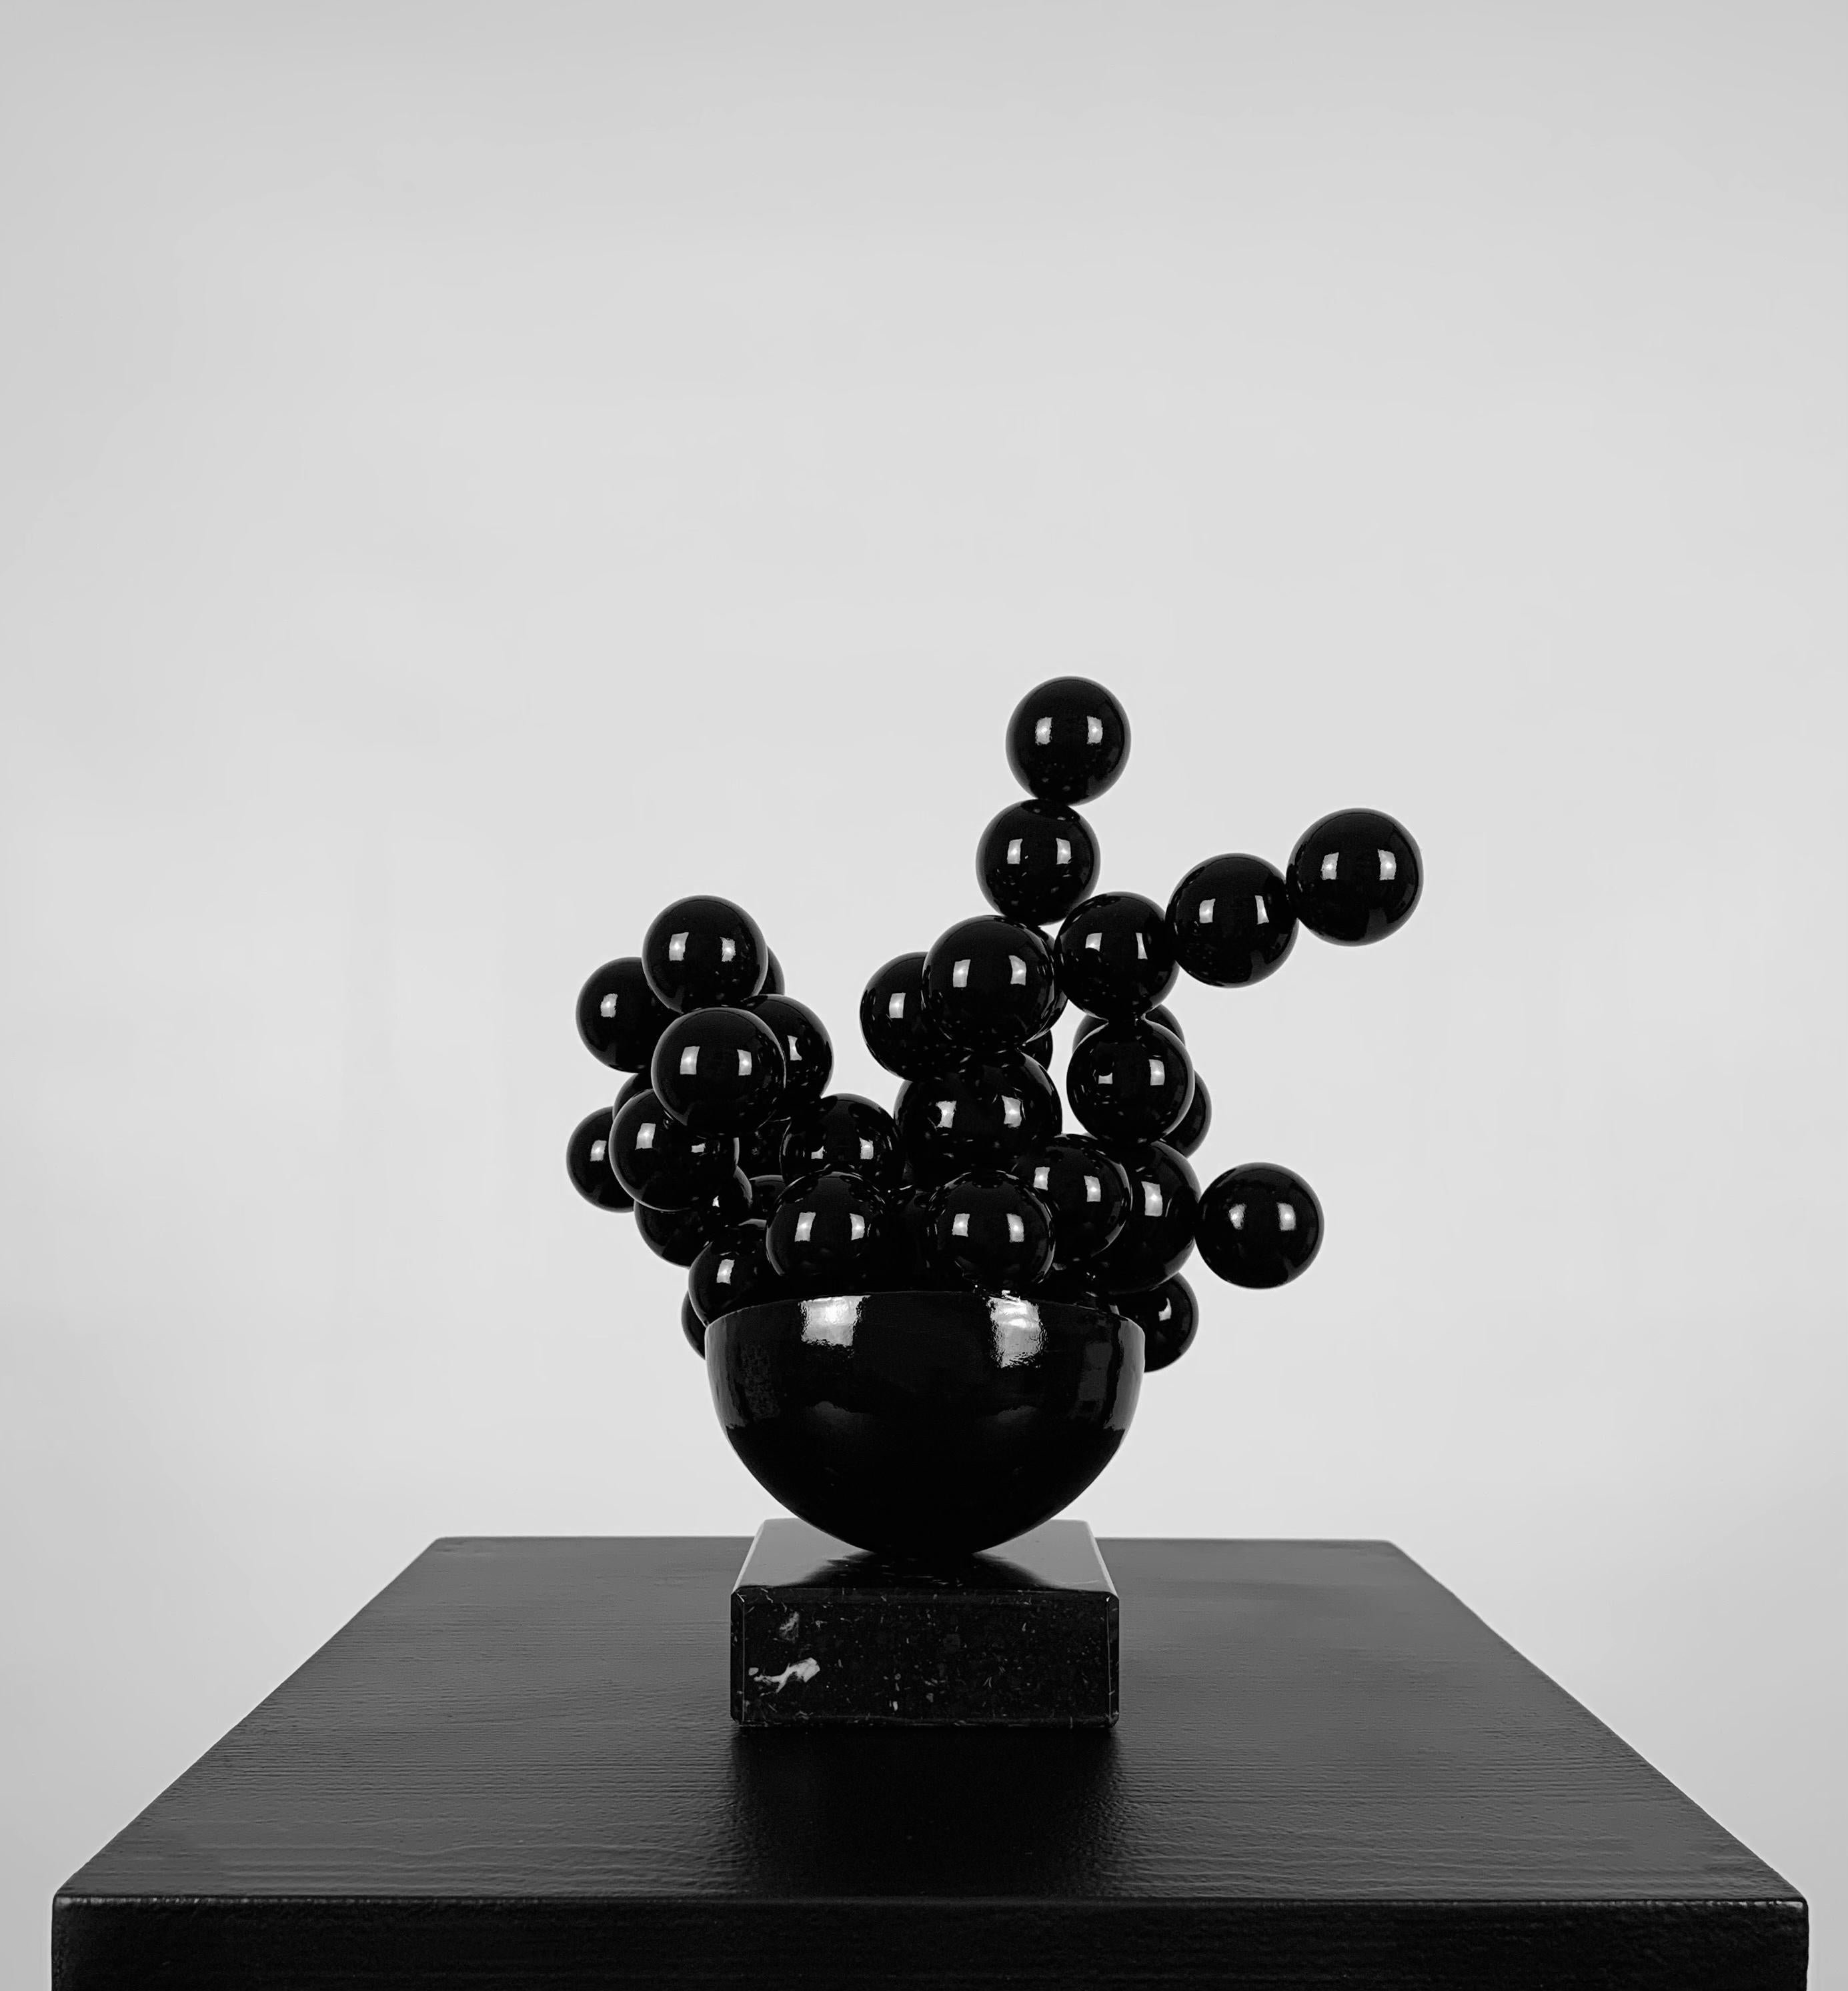 Made in England, 2021.
Created by Award-winning artists IRENA TONE and Rostyslav Kozhman.
Black. Minimalistic. Abstract. Spheres: from molecules to planets. Look around: mono sphere or billions of small combinations of spheres - this all is our